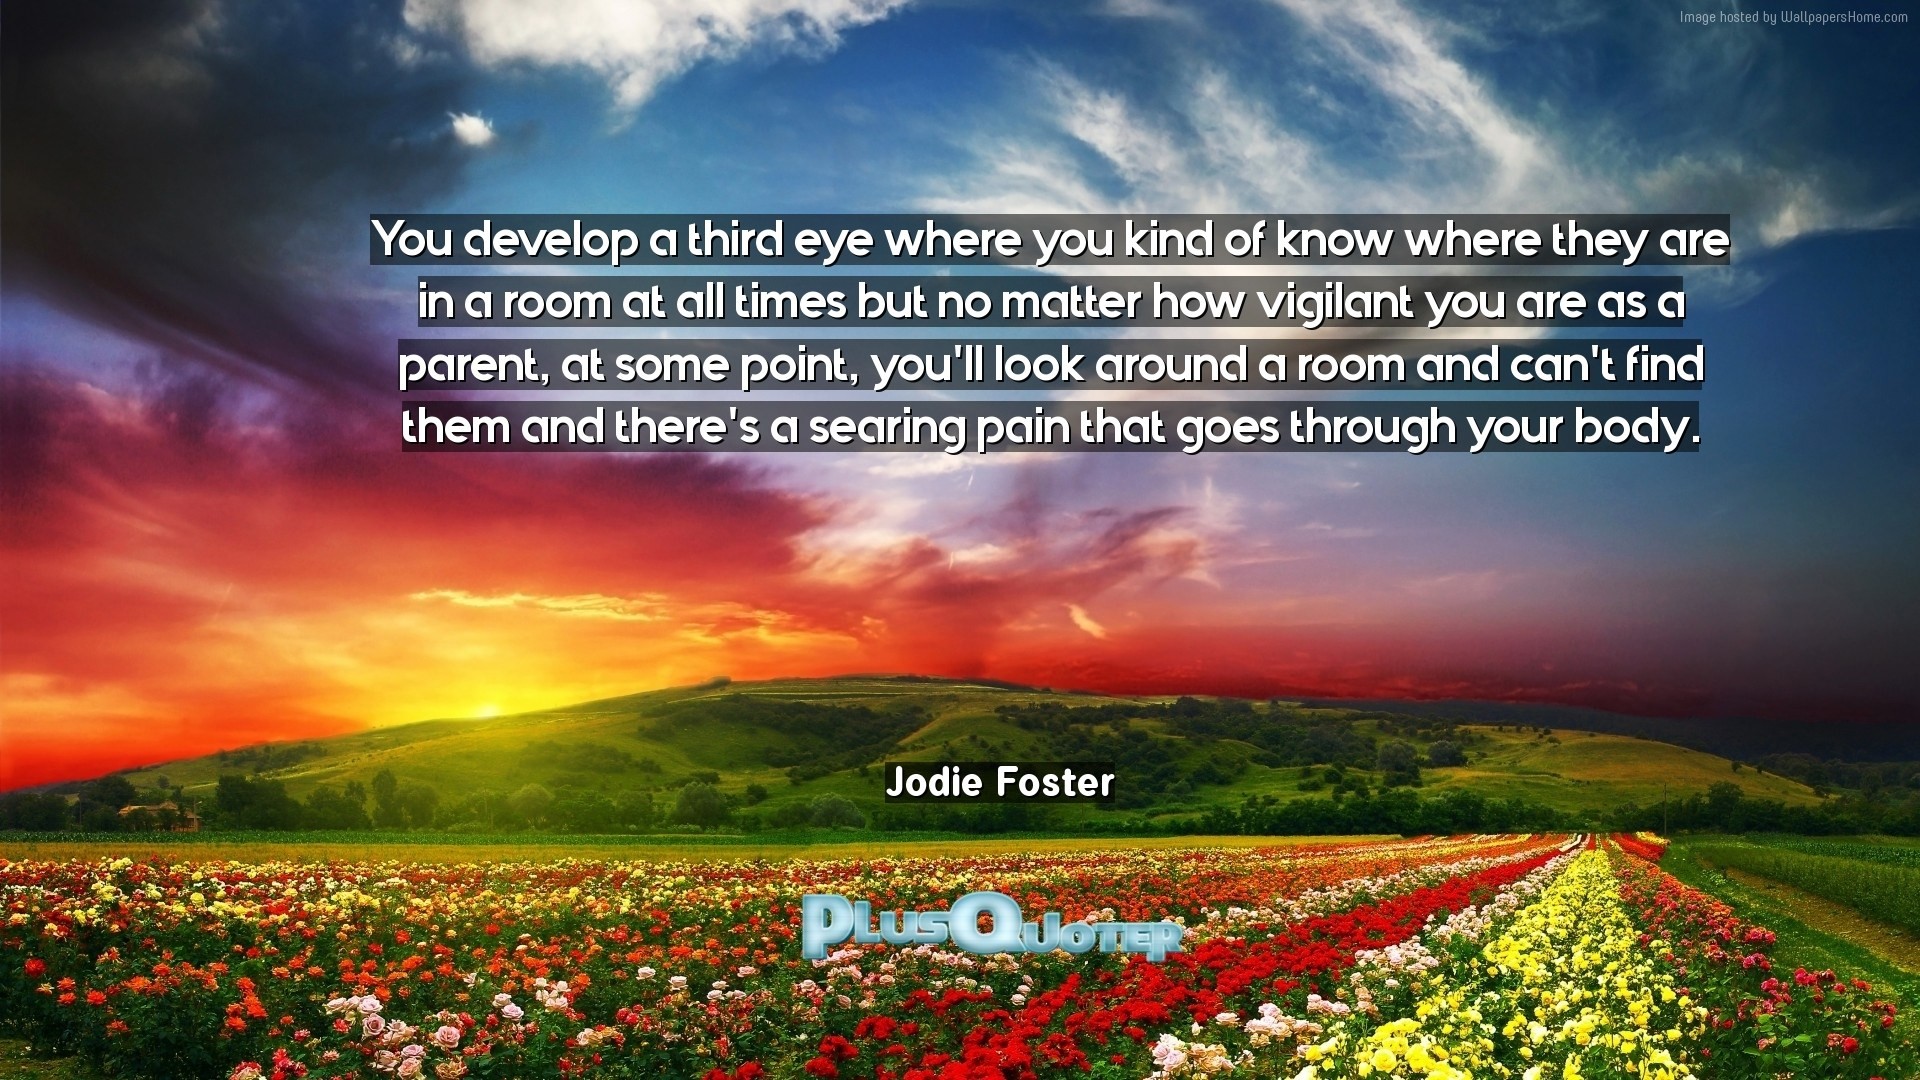 1920x1080 Download Wallpaper with inspirational Quotes- "You develop a third eye  where you kind of